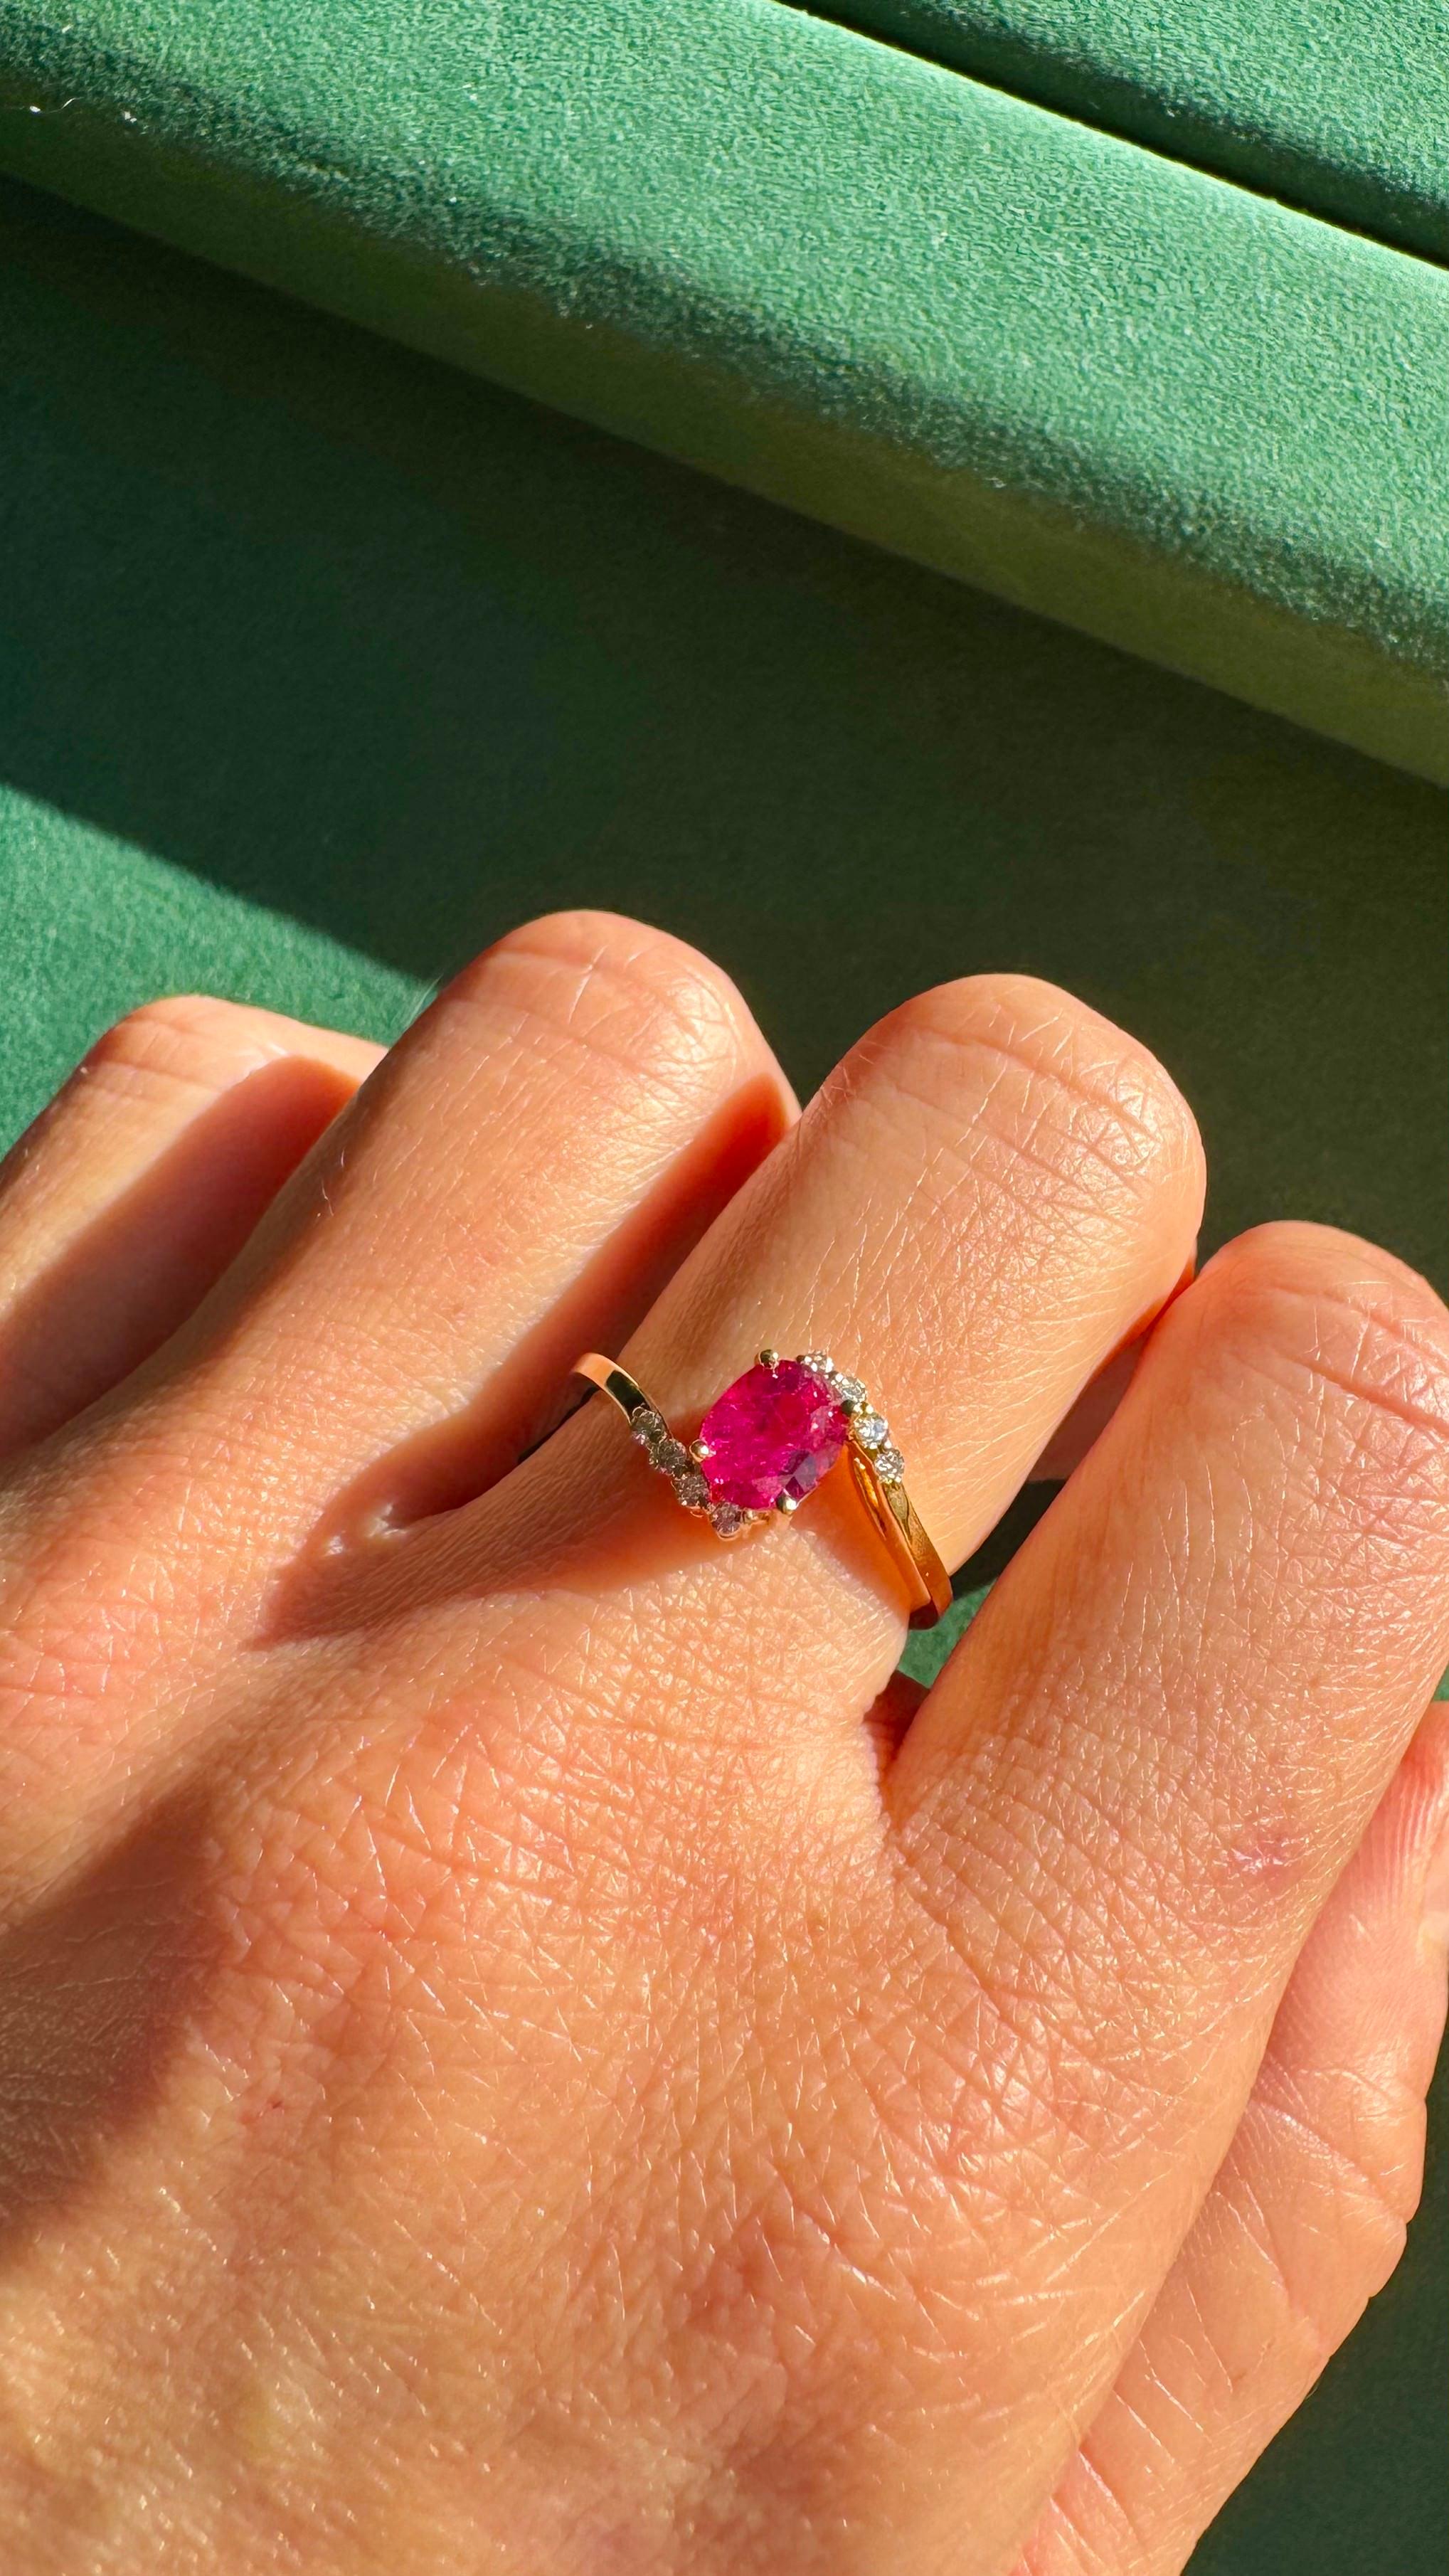 Behold the allure of our 1-carat natural and untreated Ruby, elegantly showcased in our 18K yellow gold ring. A true embodiment of sophistication and luxury.

Delivered in luxurious packaging, this ring is not merely a purchase; it's an experience.